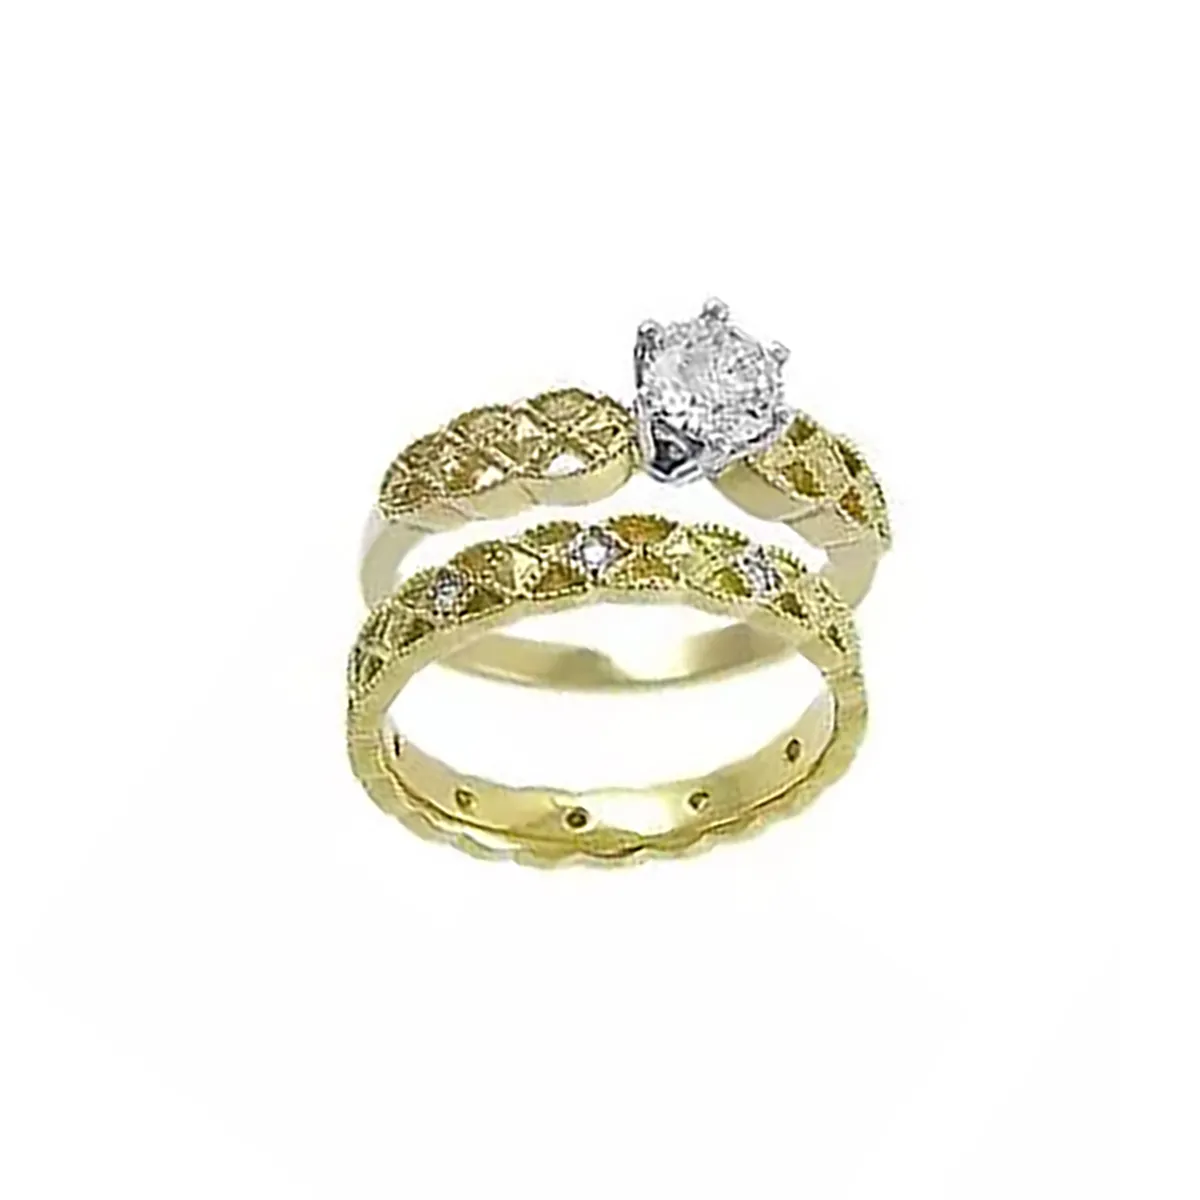 1_celtic_ring_yellow_gold_diamond_CL0294CL0295...